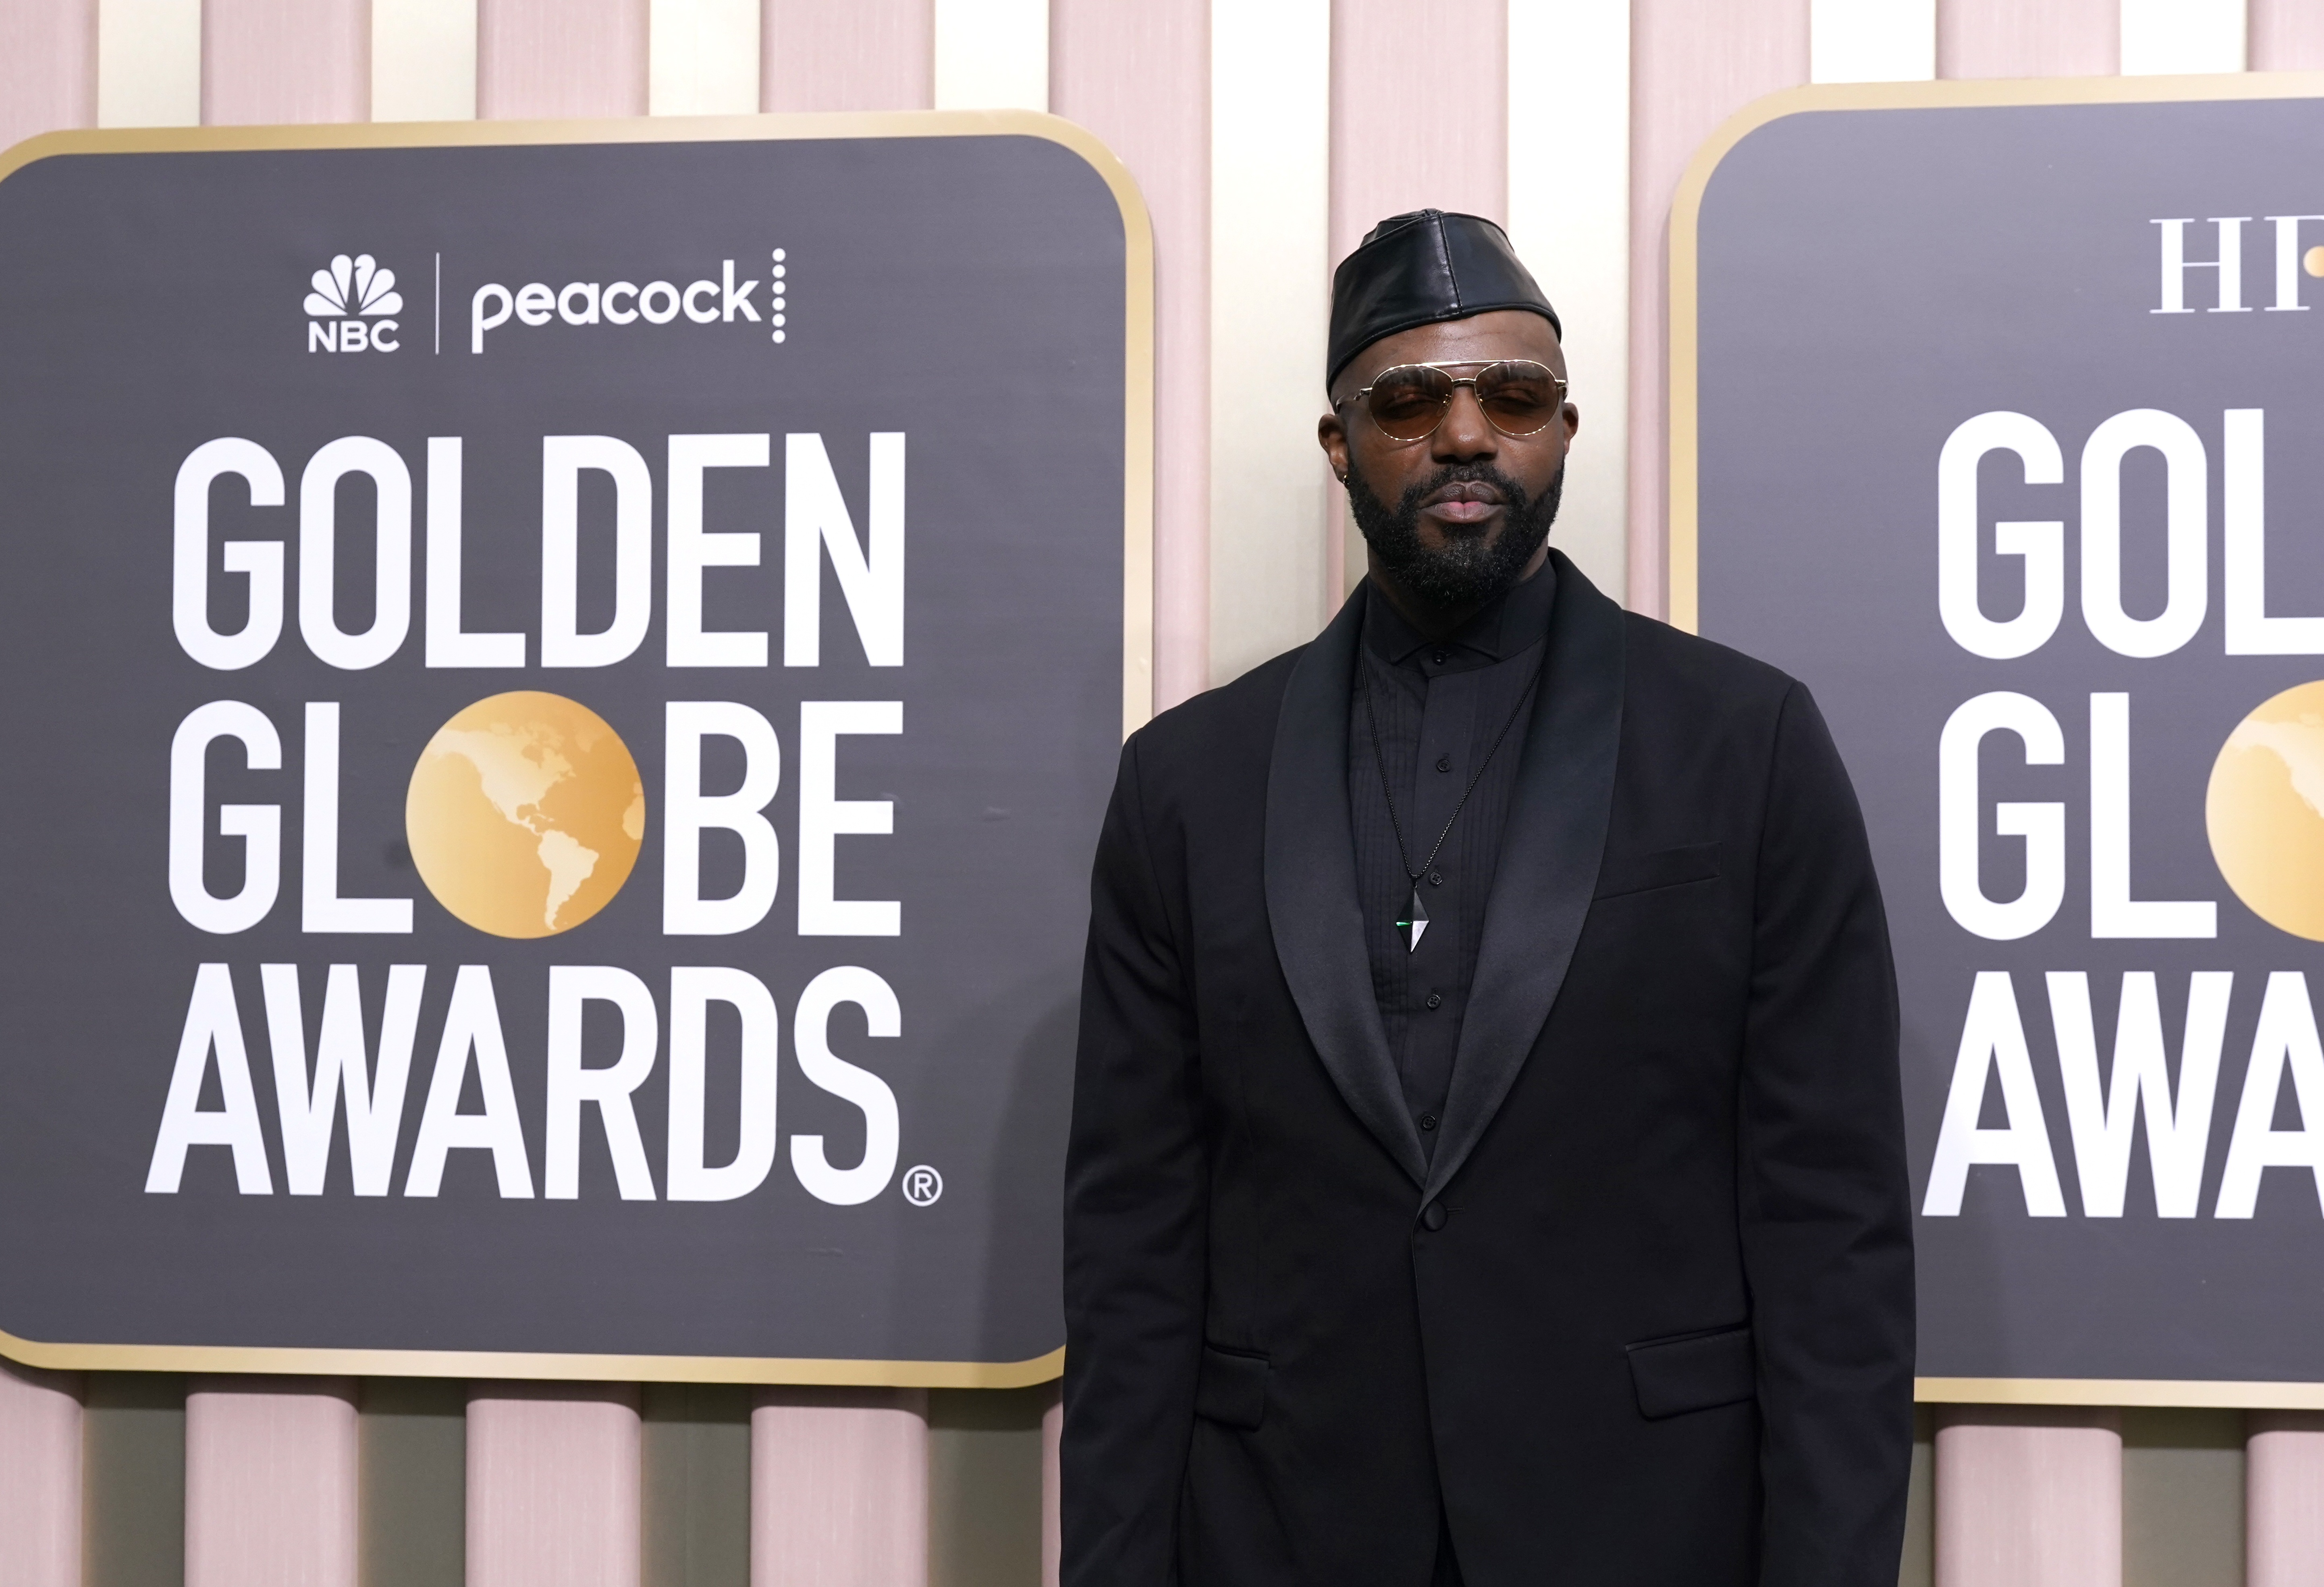 Carl Clemons-Hopkins arrives at the 80th annual Golden Globe Awards at the Beverly Hilton Hotel on Tuesday, Jan. 10, 2023, in Beverly Hills, Calif. (Photo by Jordan Strauss/Invision/AP)